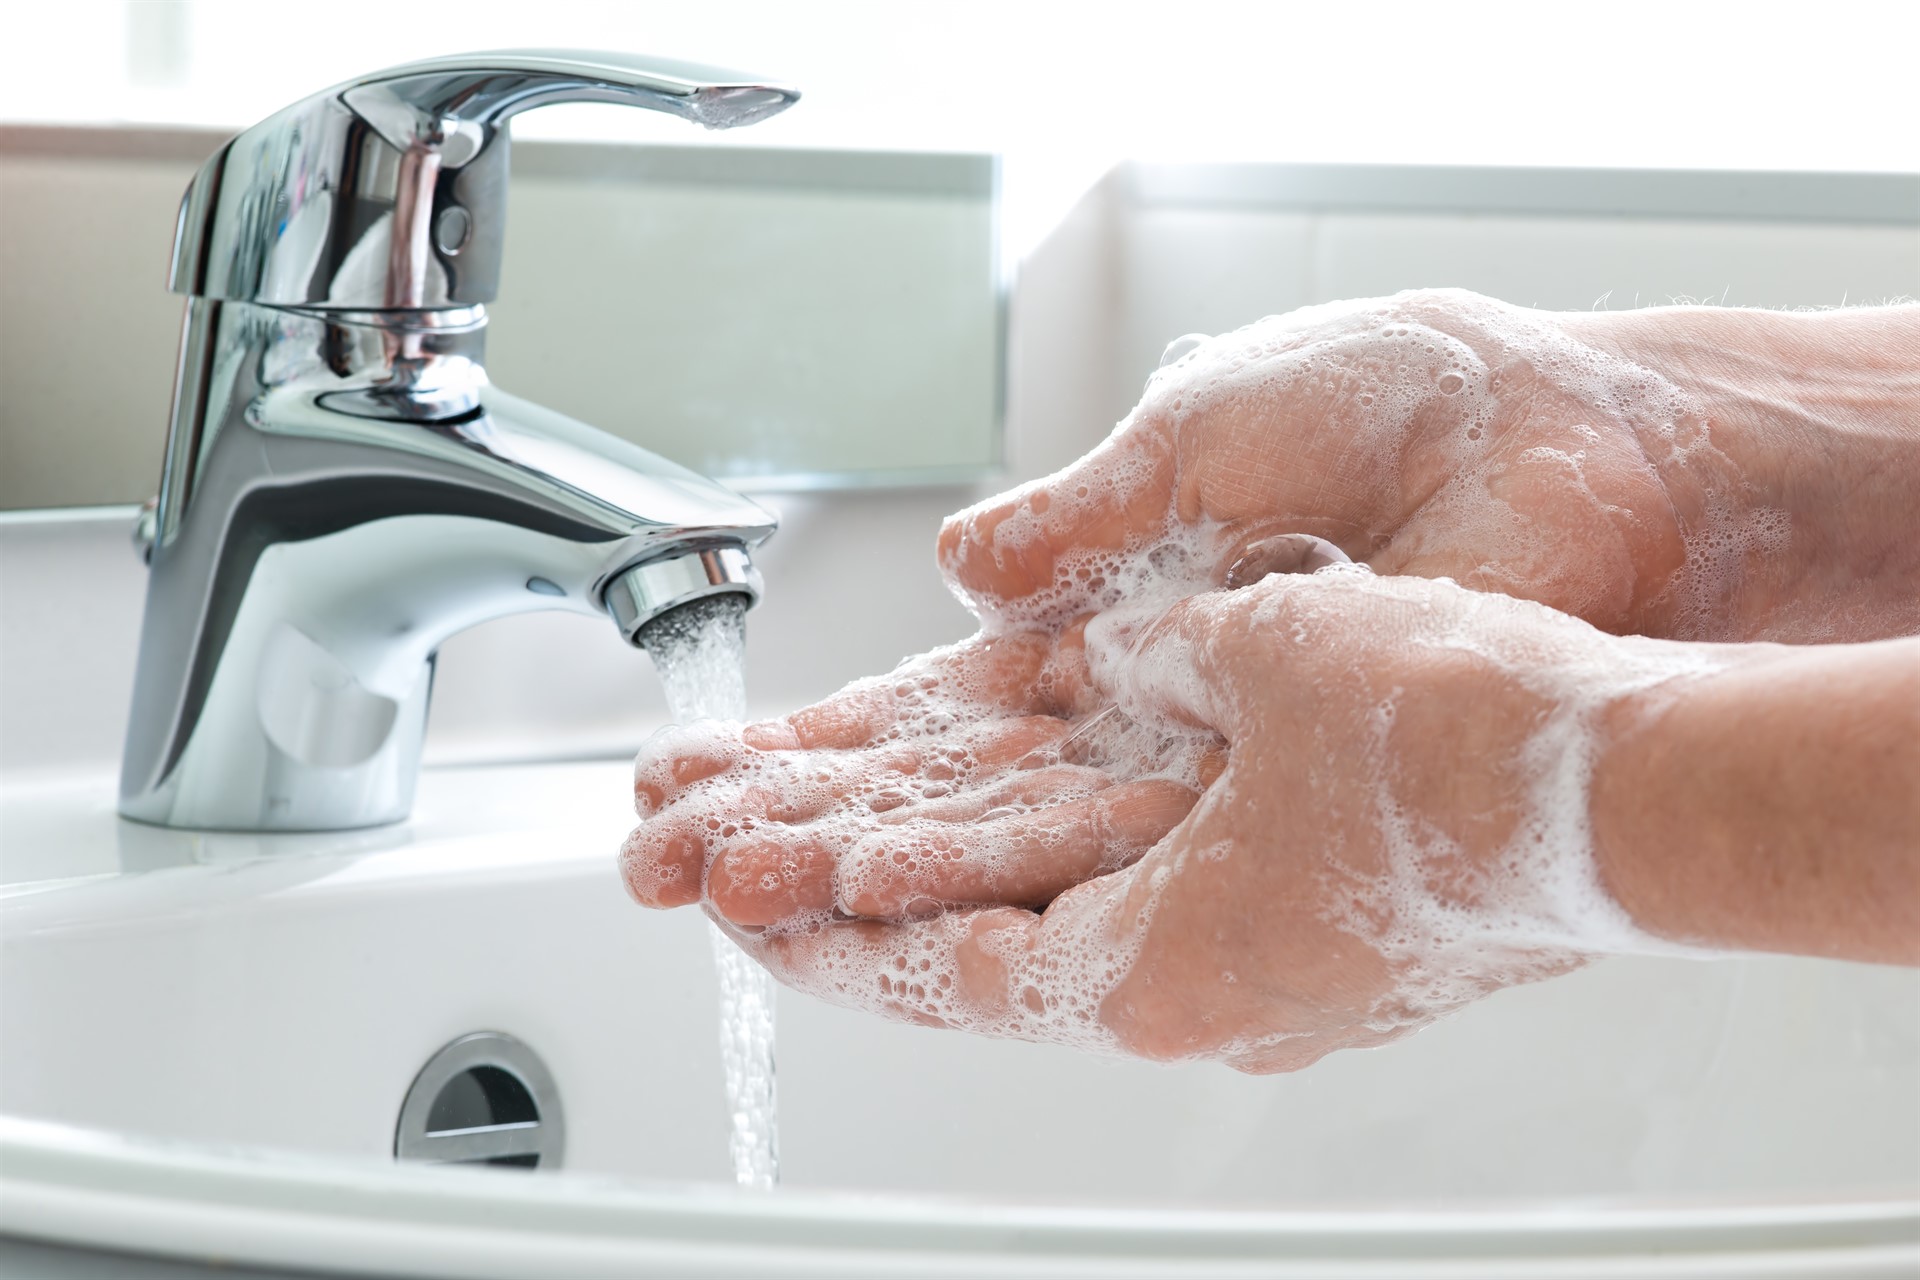 Clean hands prevent cold and flu